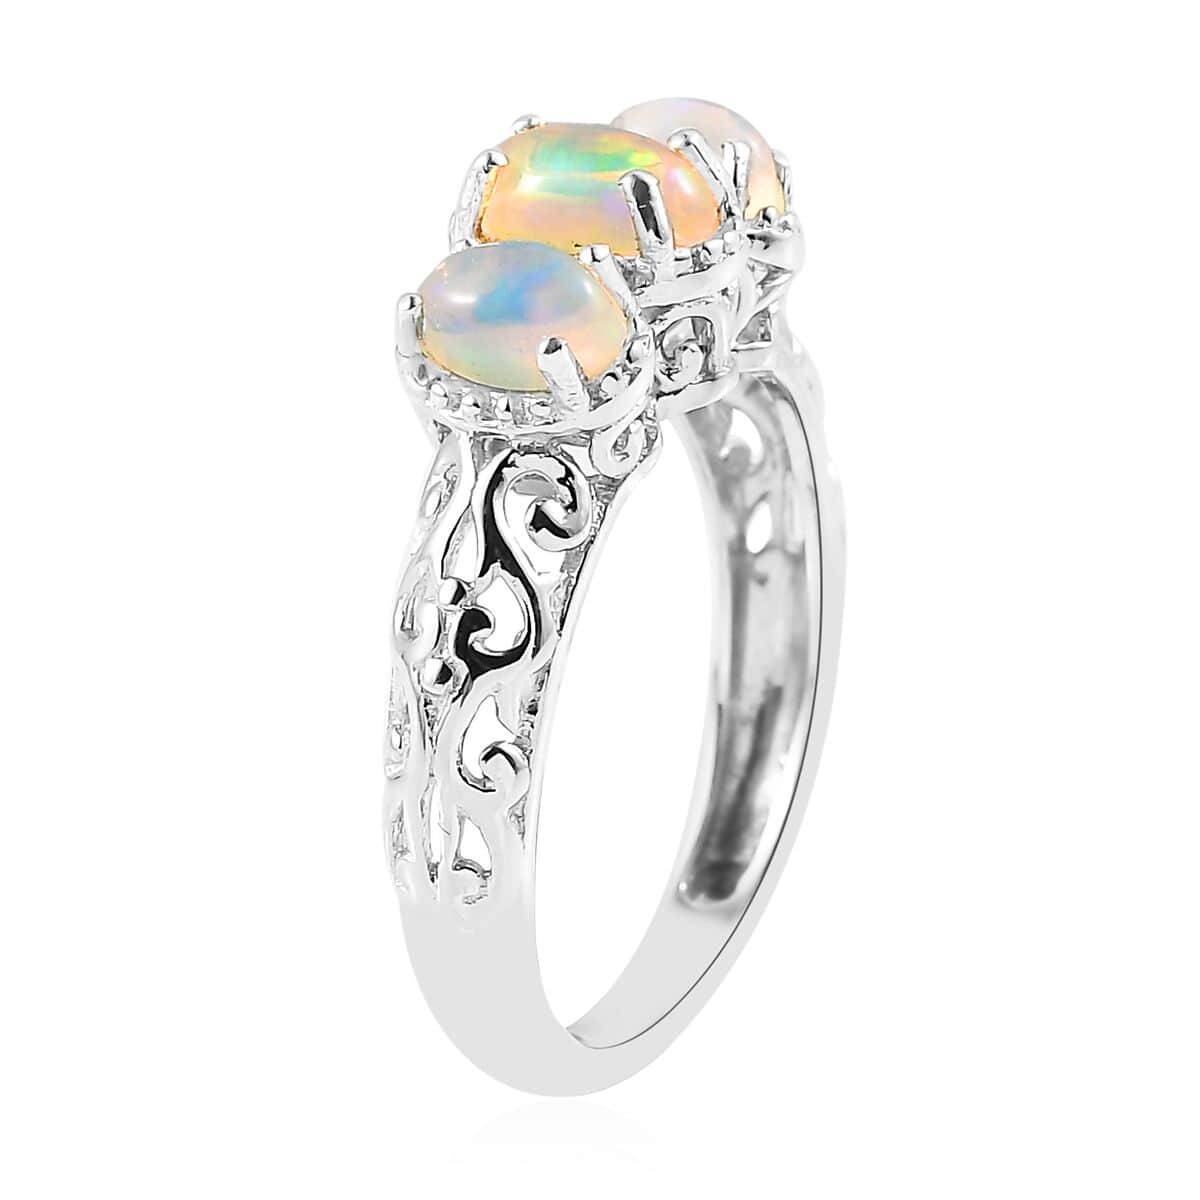 Opal Ring, 3 Stone Opal Ring, Trilogy Ring, Sterling Silver Ring,  Birthstone Jewelry, Ethiopian Welo Opal 3 Stone Ring 0.75 ctw (Size 10)